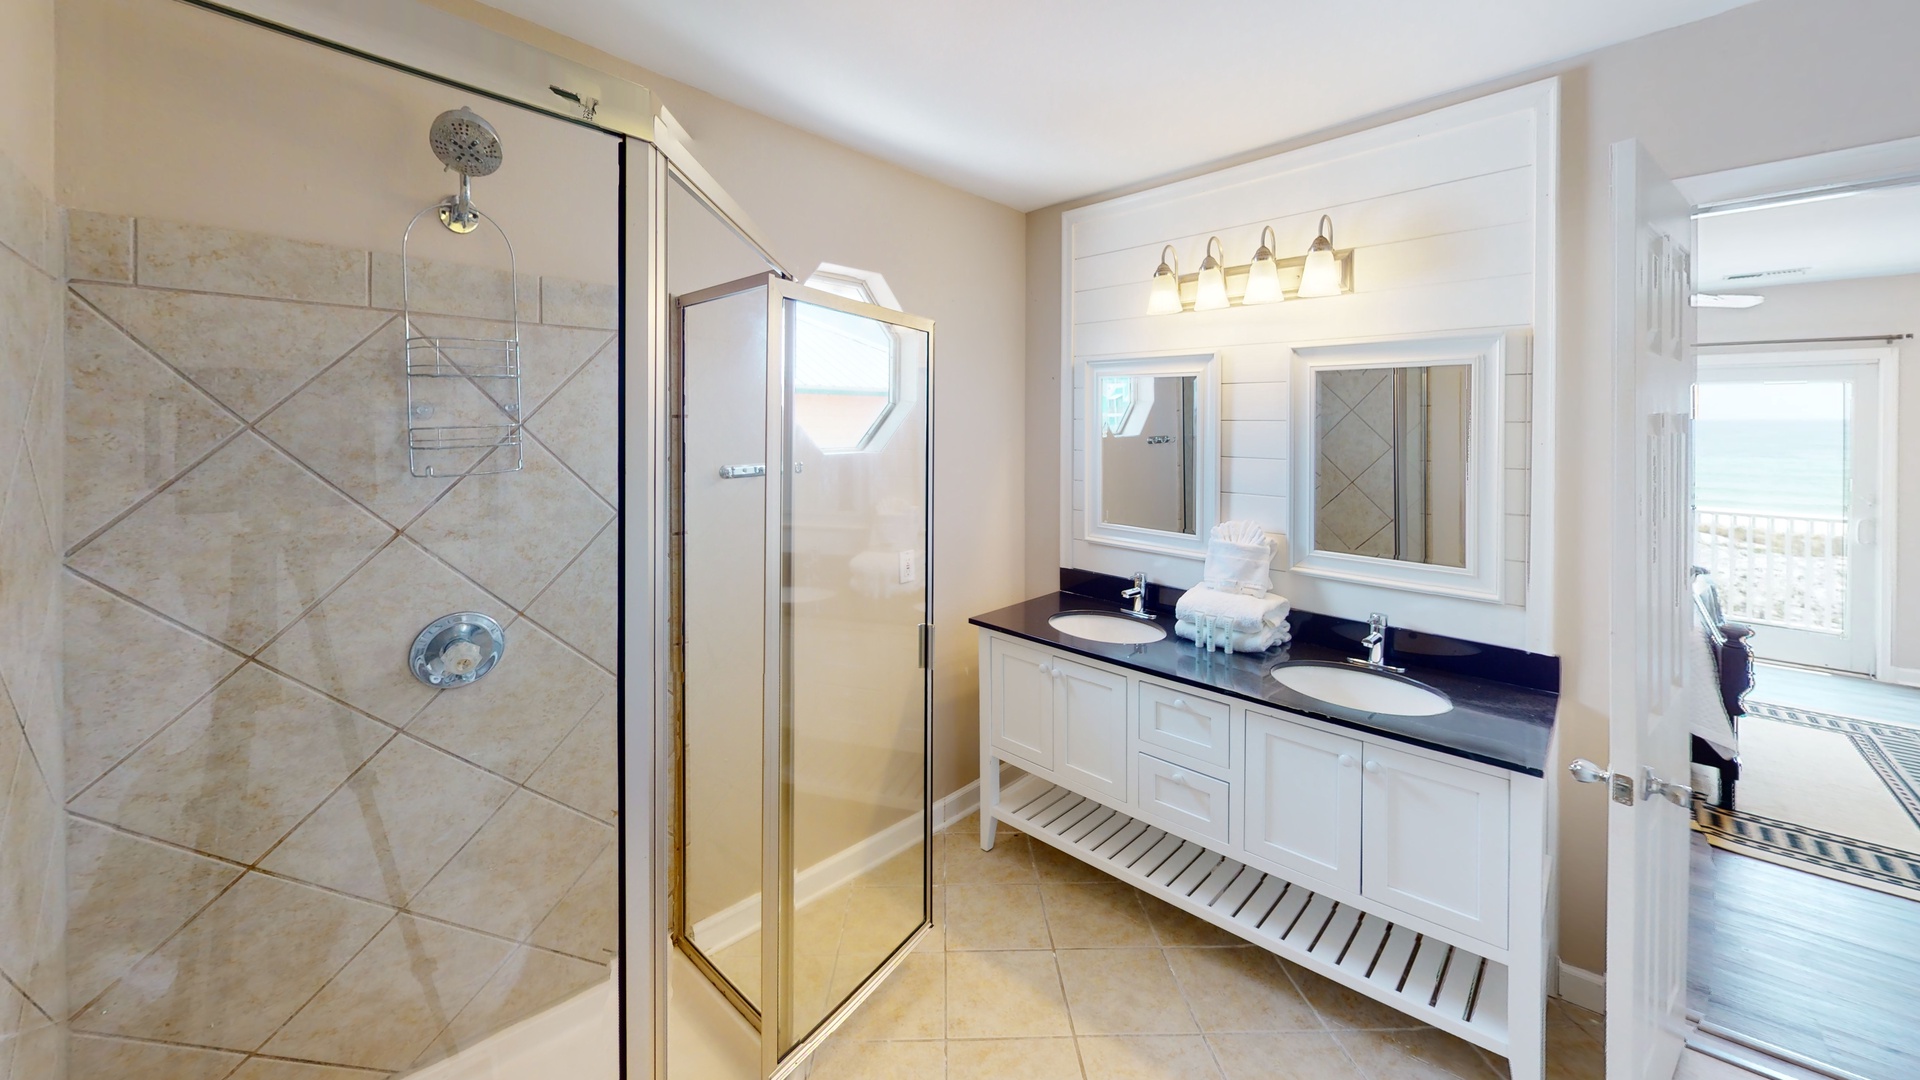 This 2nd floor bathroom has an entrance from bedroom 3 and the hall- it features a walk-in shower and a double vanity